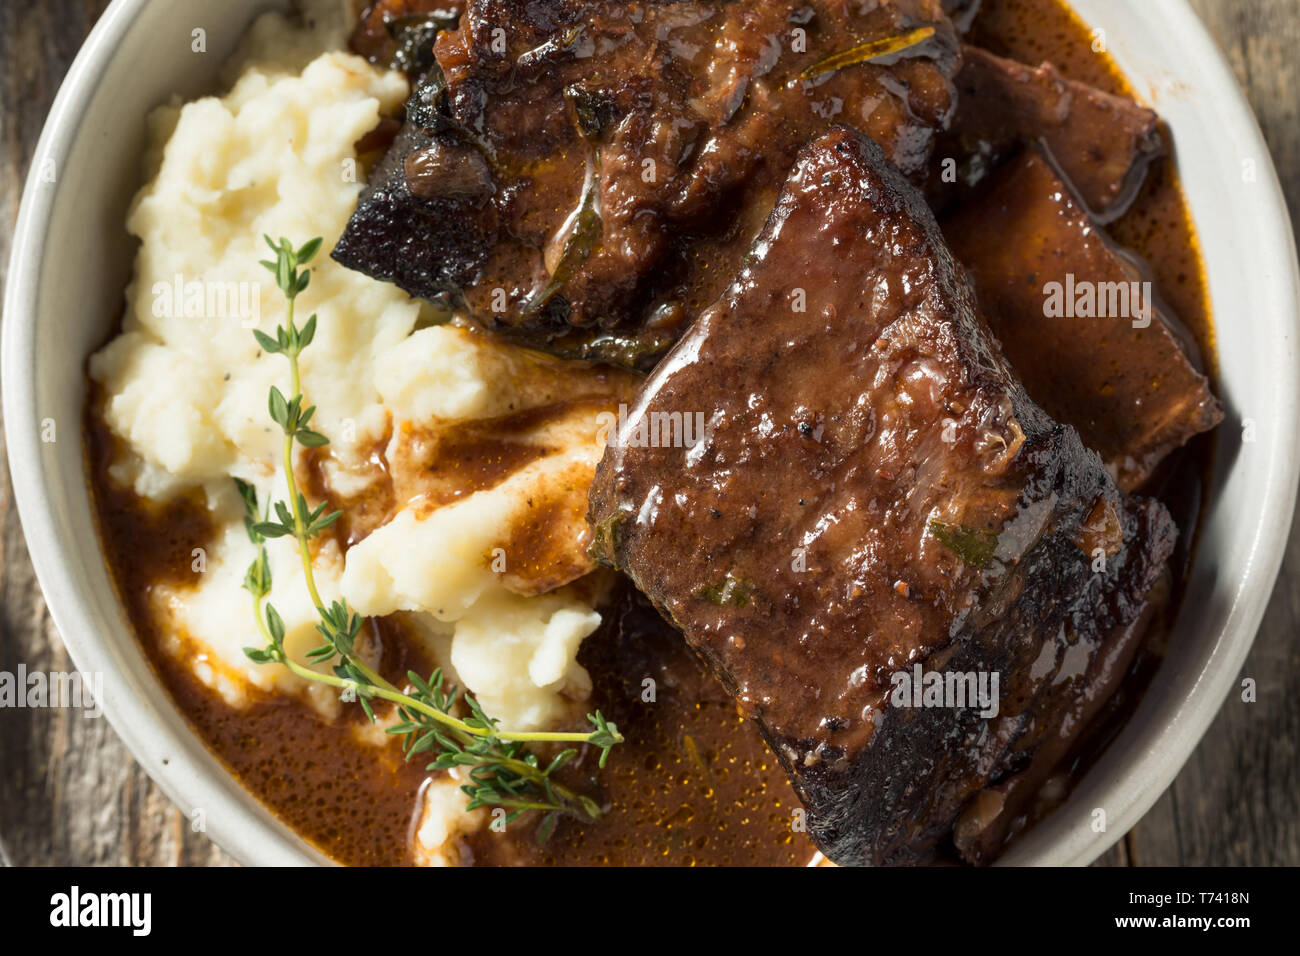 Homemade Braised Beef Short Ribs with Gravy and Potatoes Stock Photo